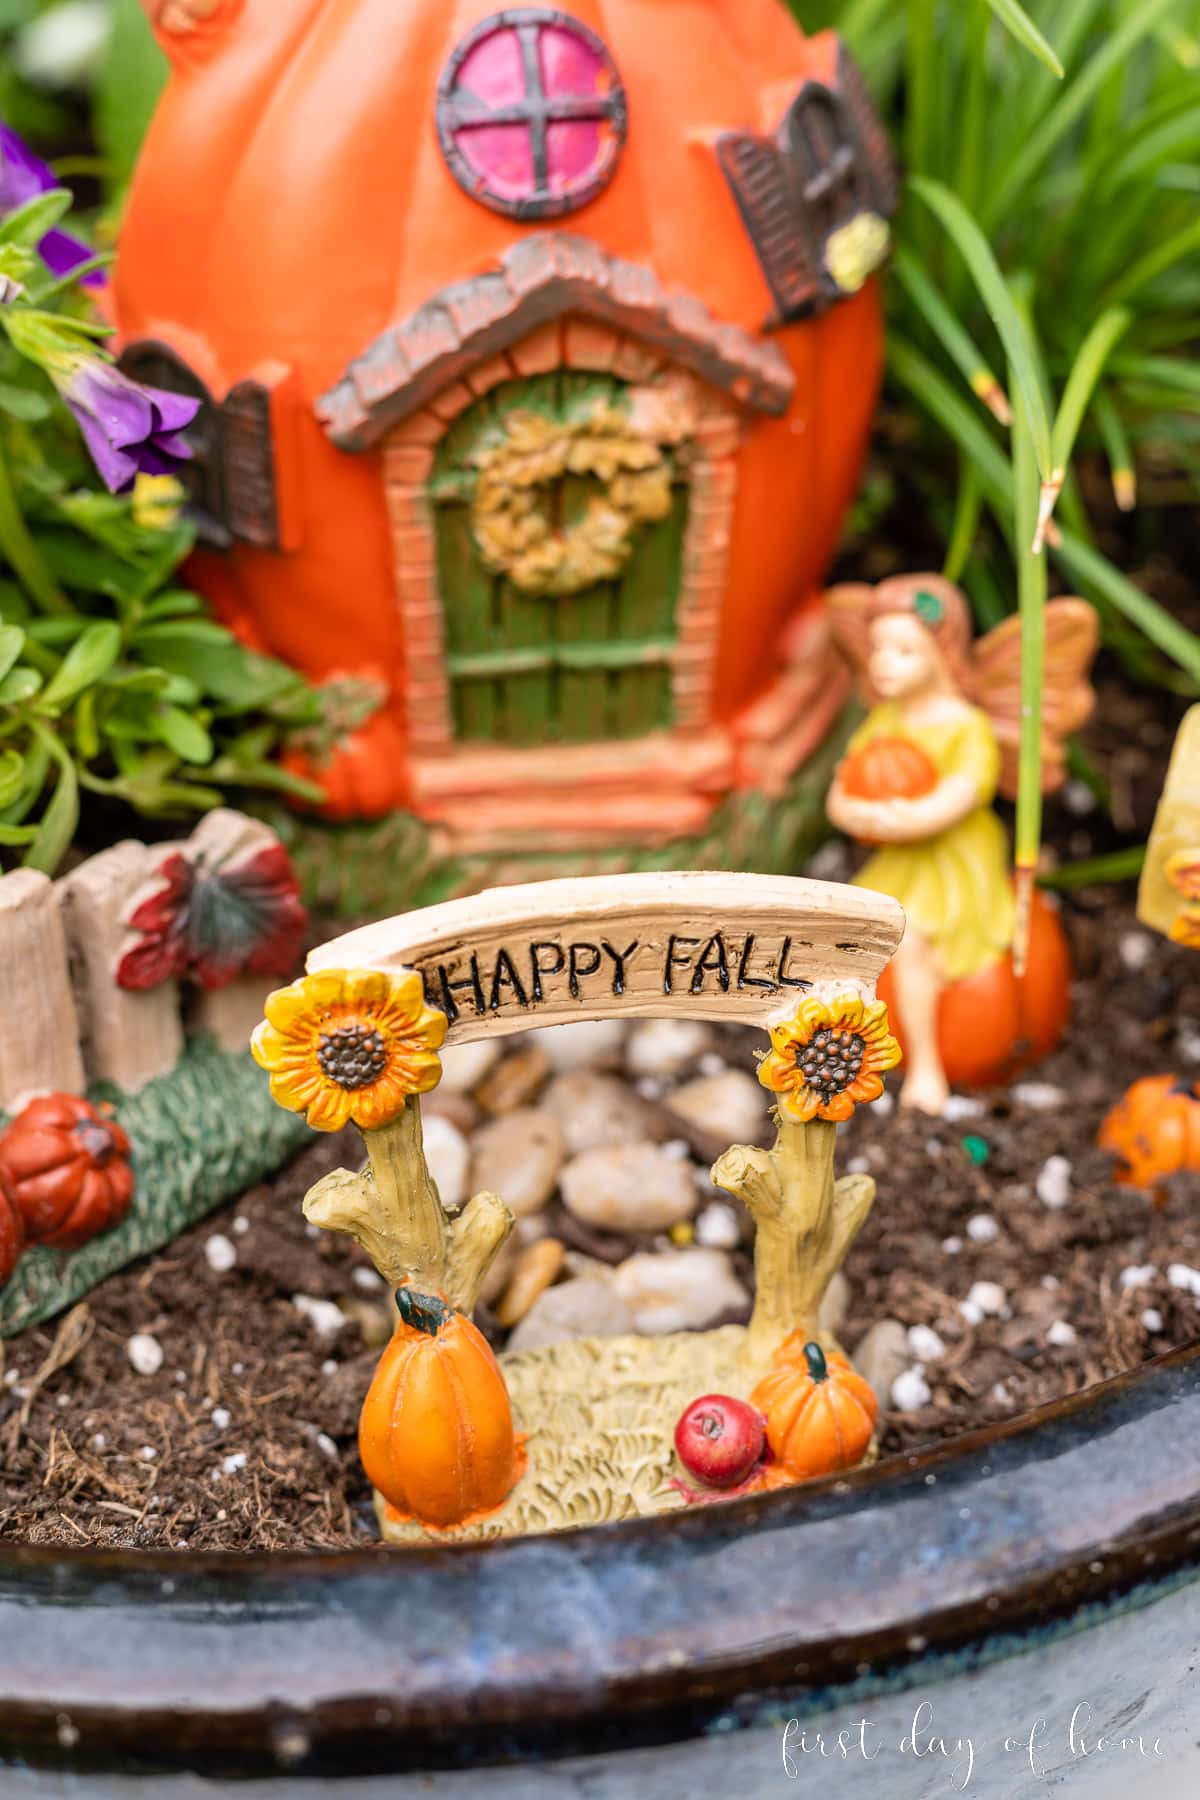 Closeup of Dollar Tree figurines with archway that reads "Happy Fall"